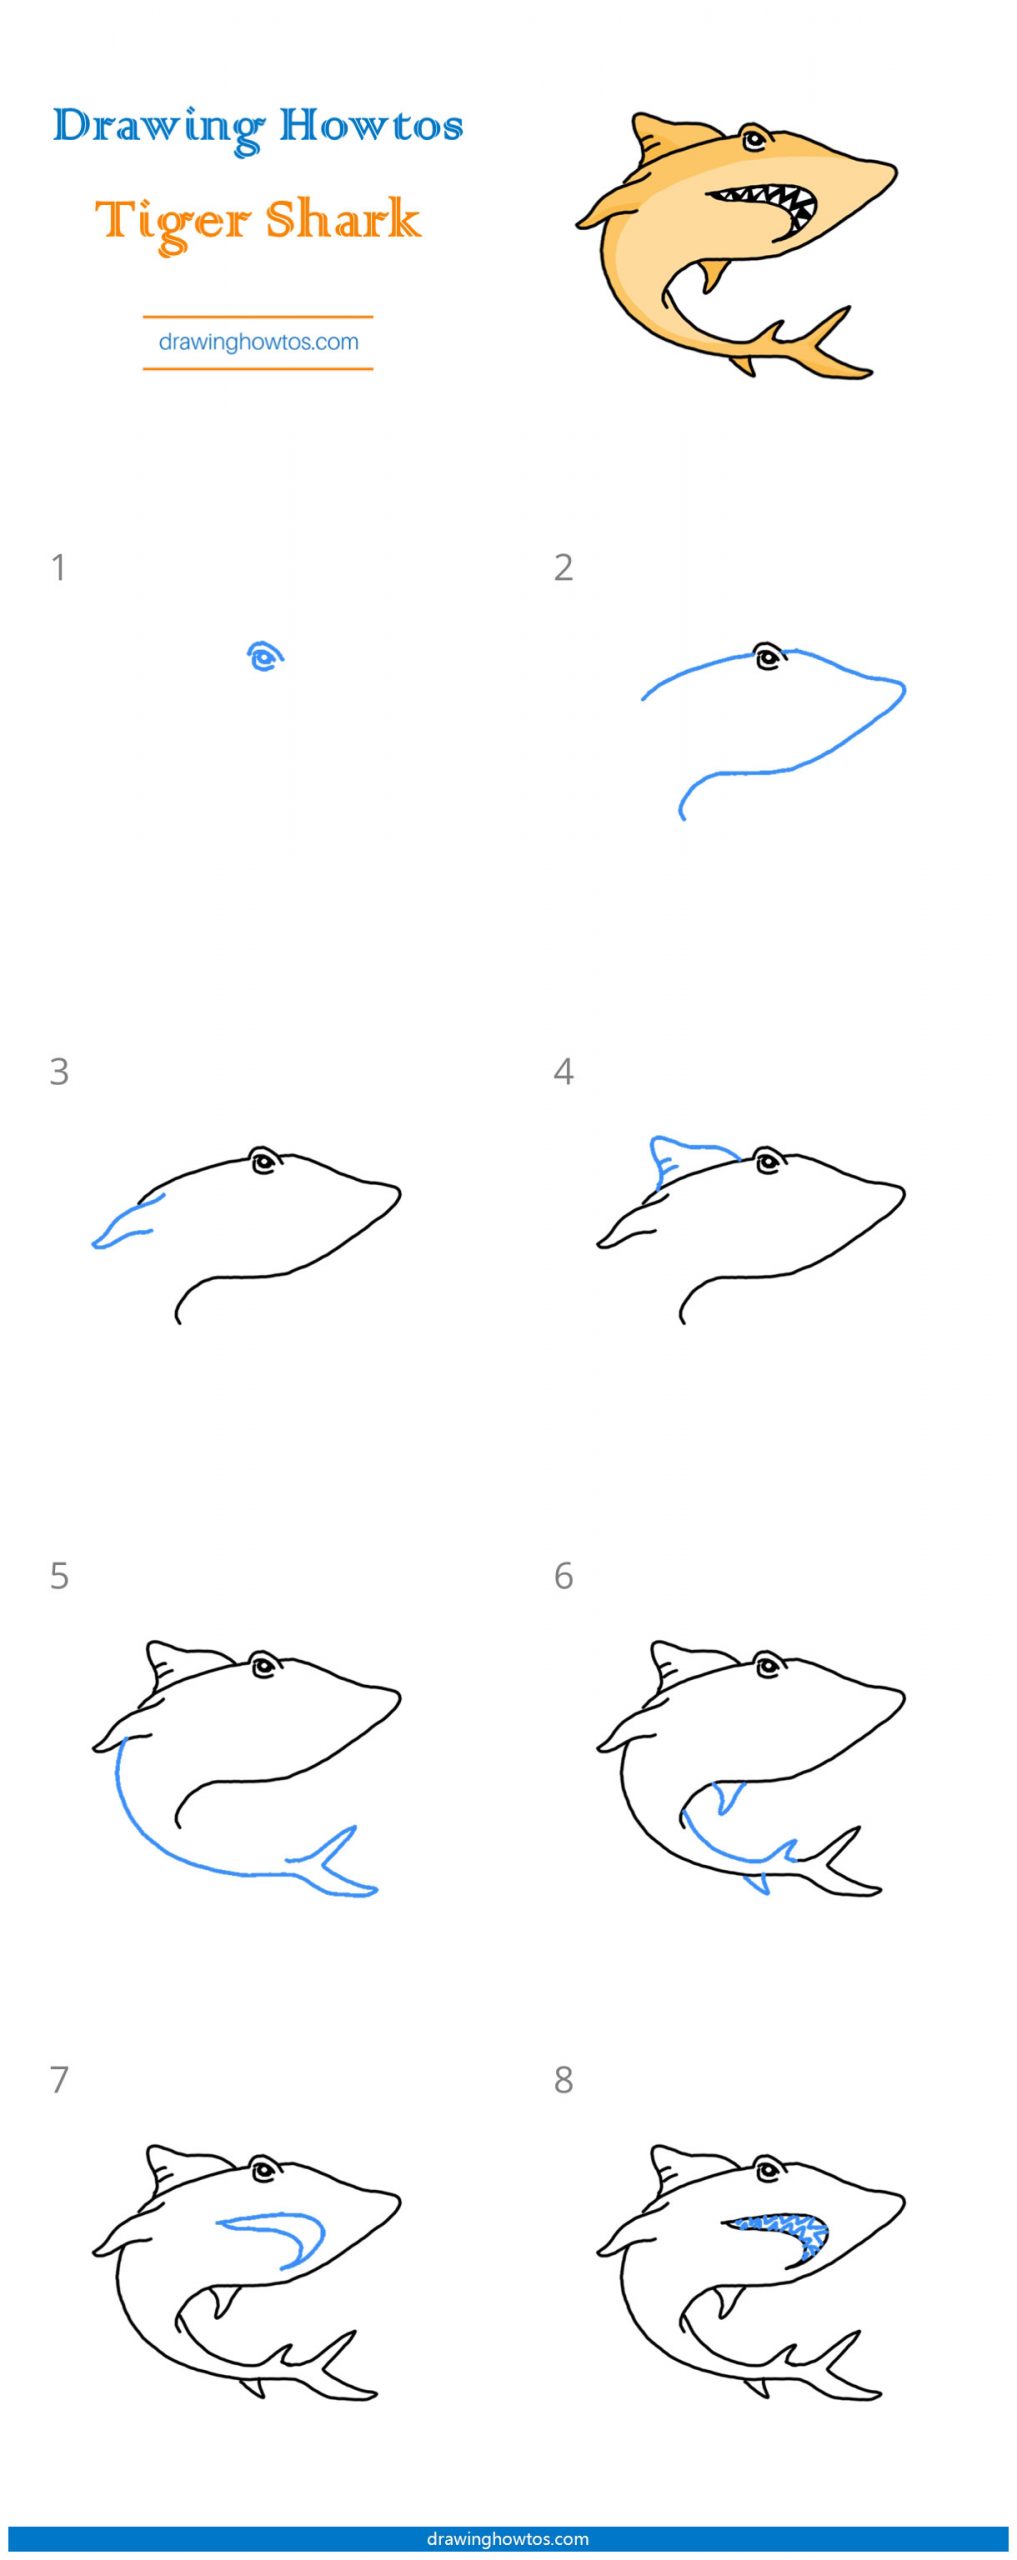 How to Draw a Tiger Shark Step by Step